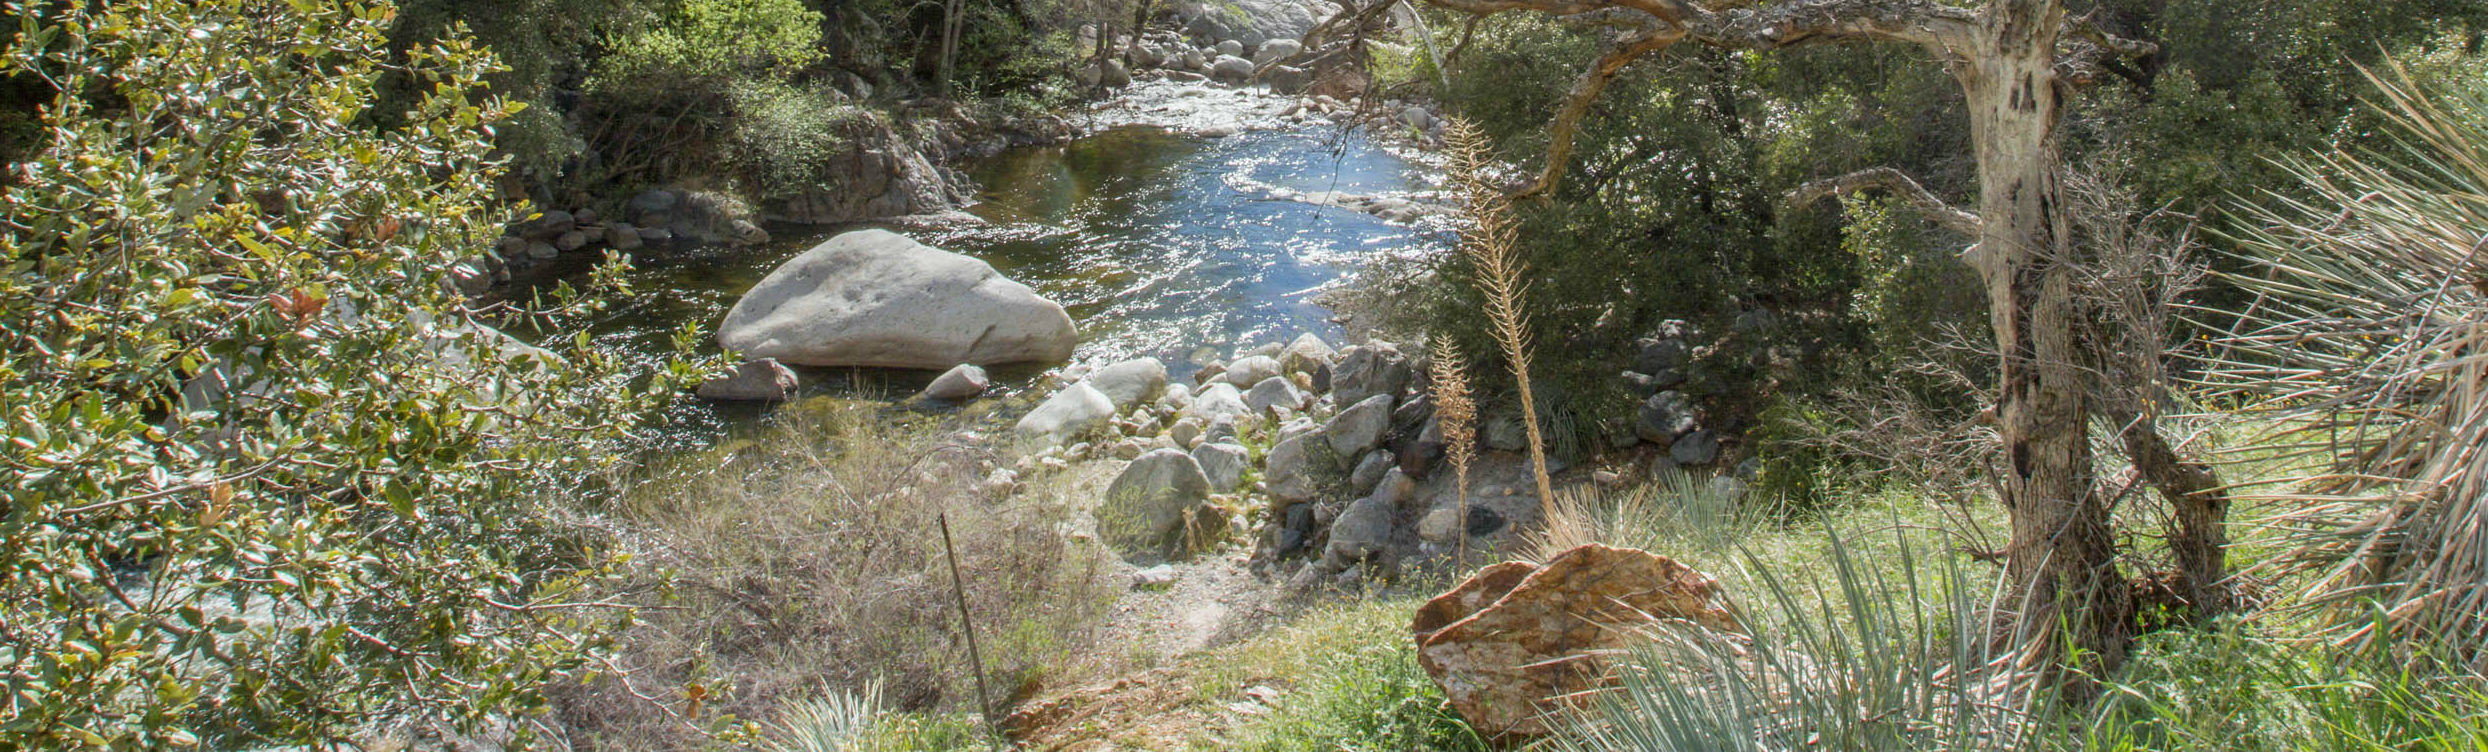 A stream in the foothills of Sequoia National Park.